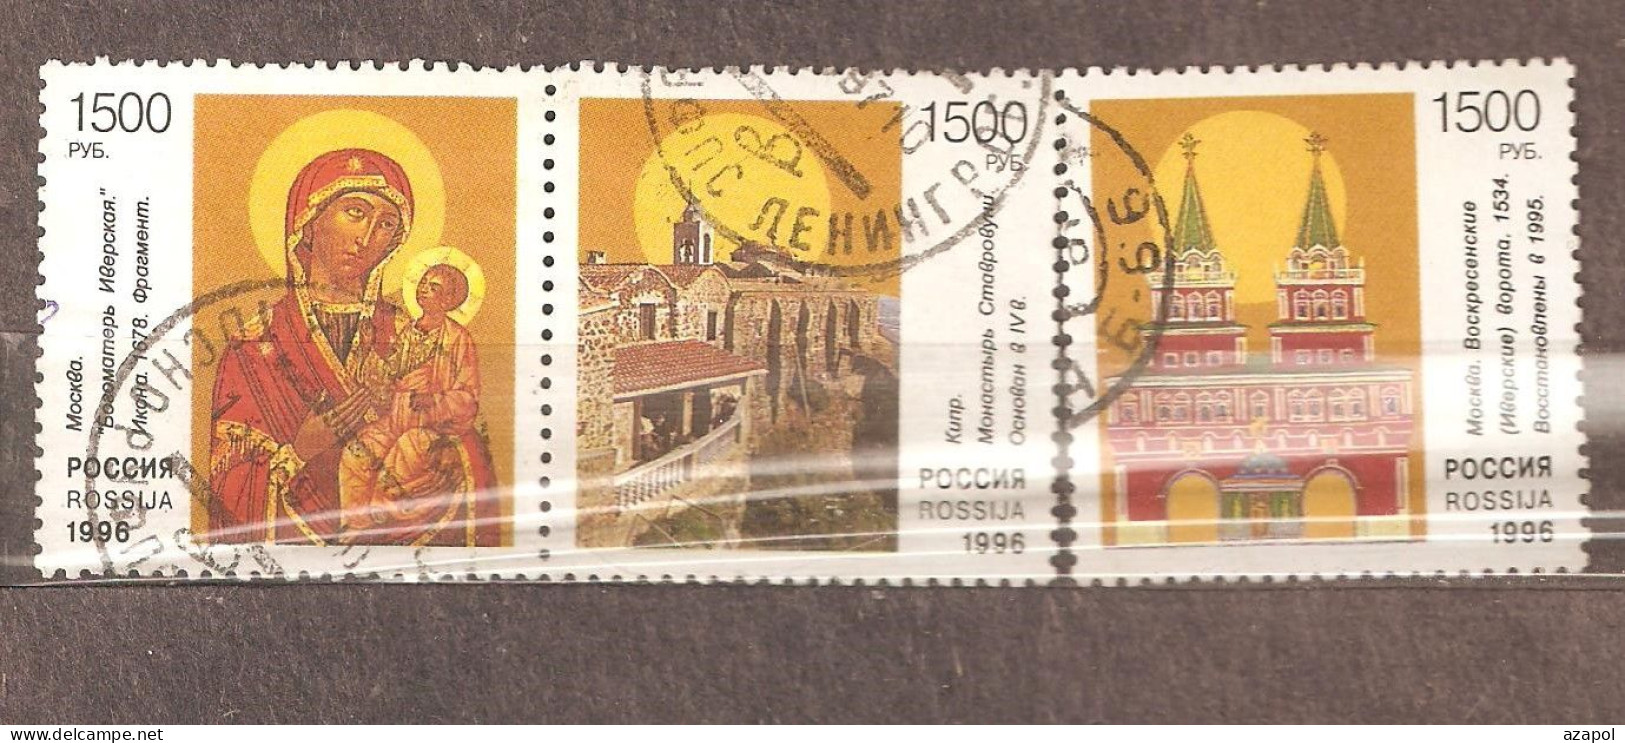 Russia: 3 Used Stamps Of A Set, Orthodox Religion - Join Issue With Cyprus, 1996, Mi#542-4 - Gebraucht